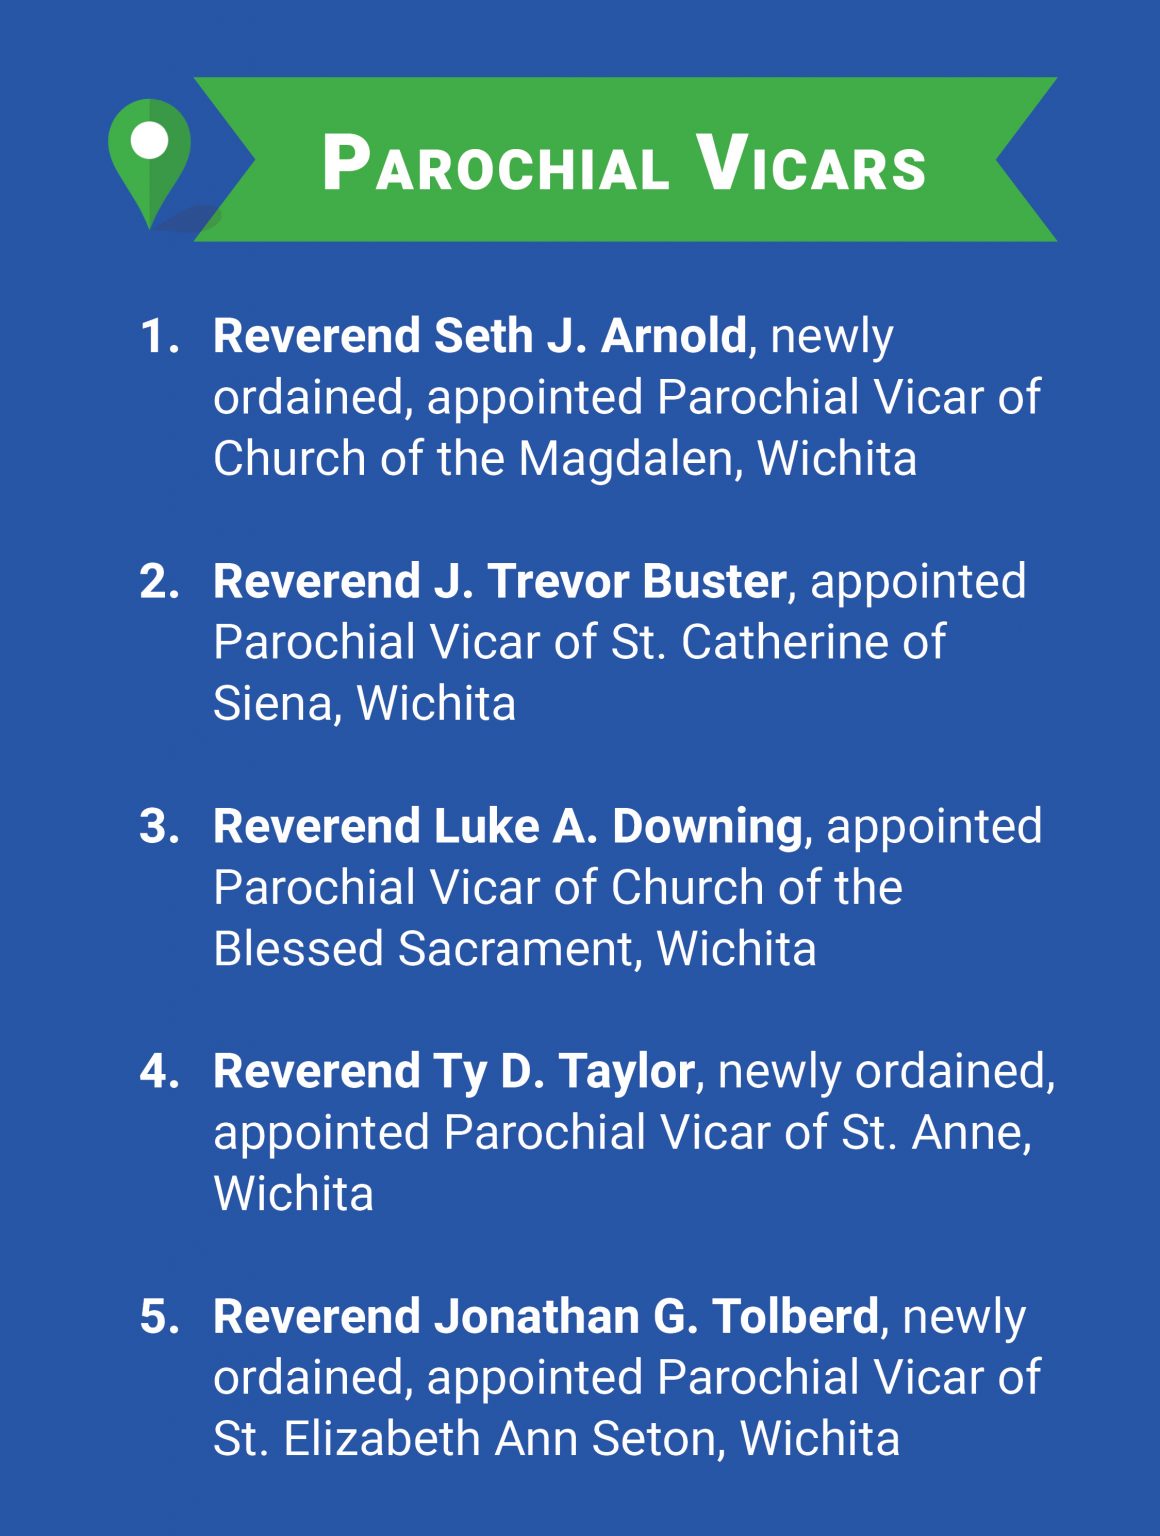 drvc priest assignments 2022